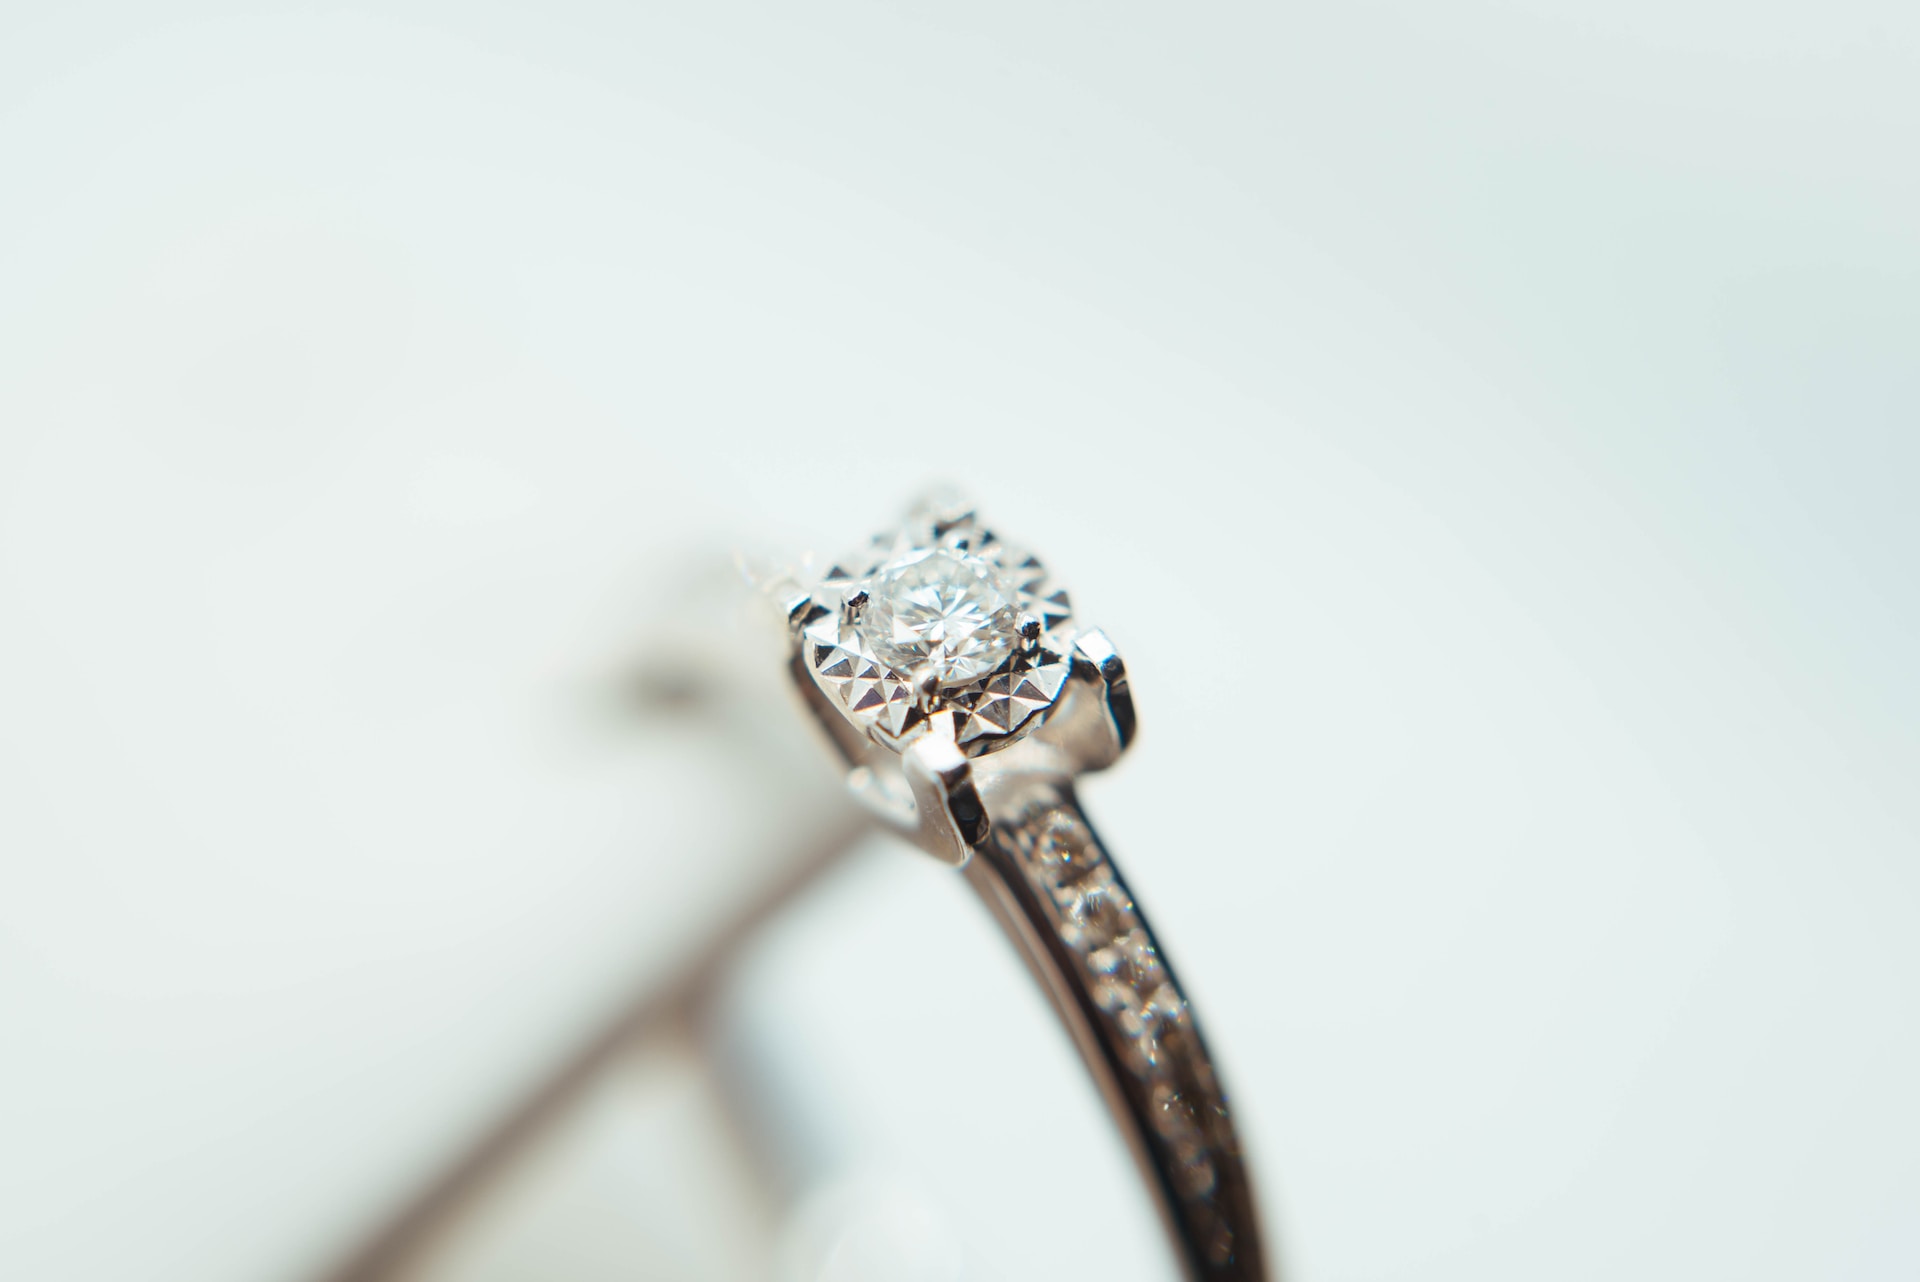 A close up of a small round-cut diamond on an engagement ring.